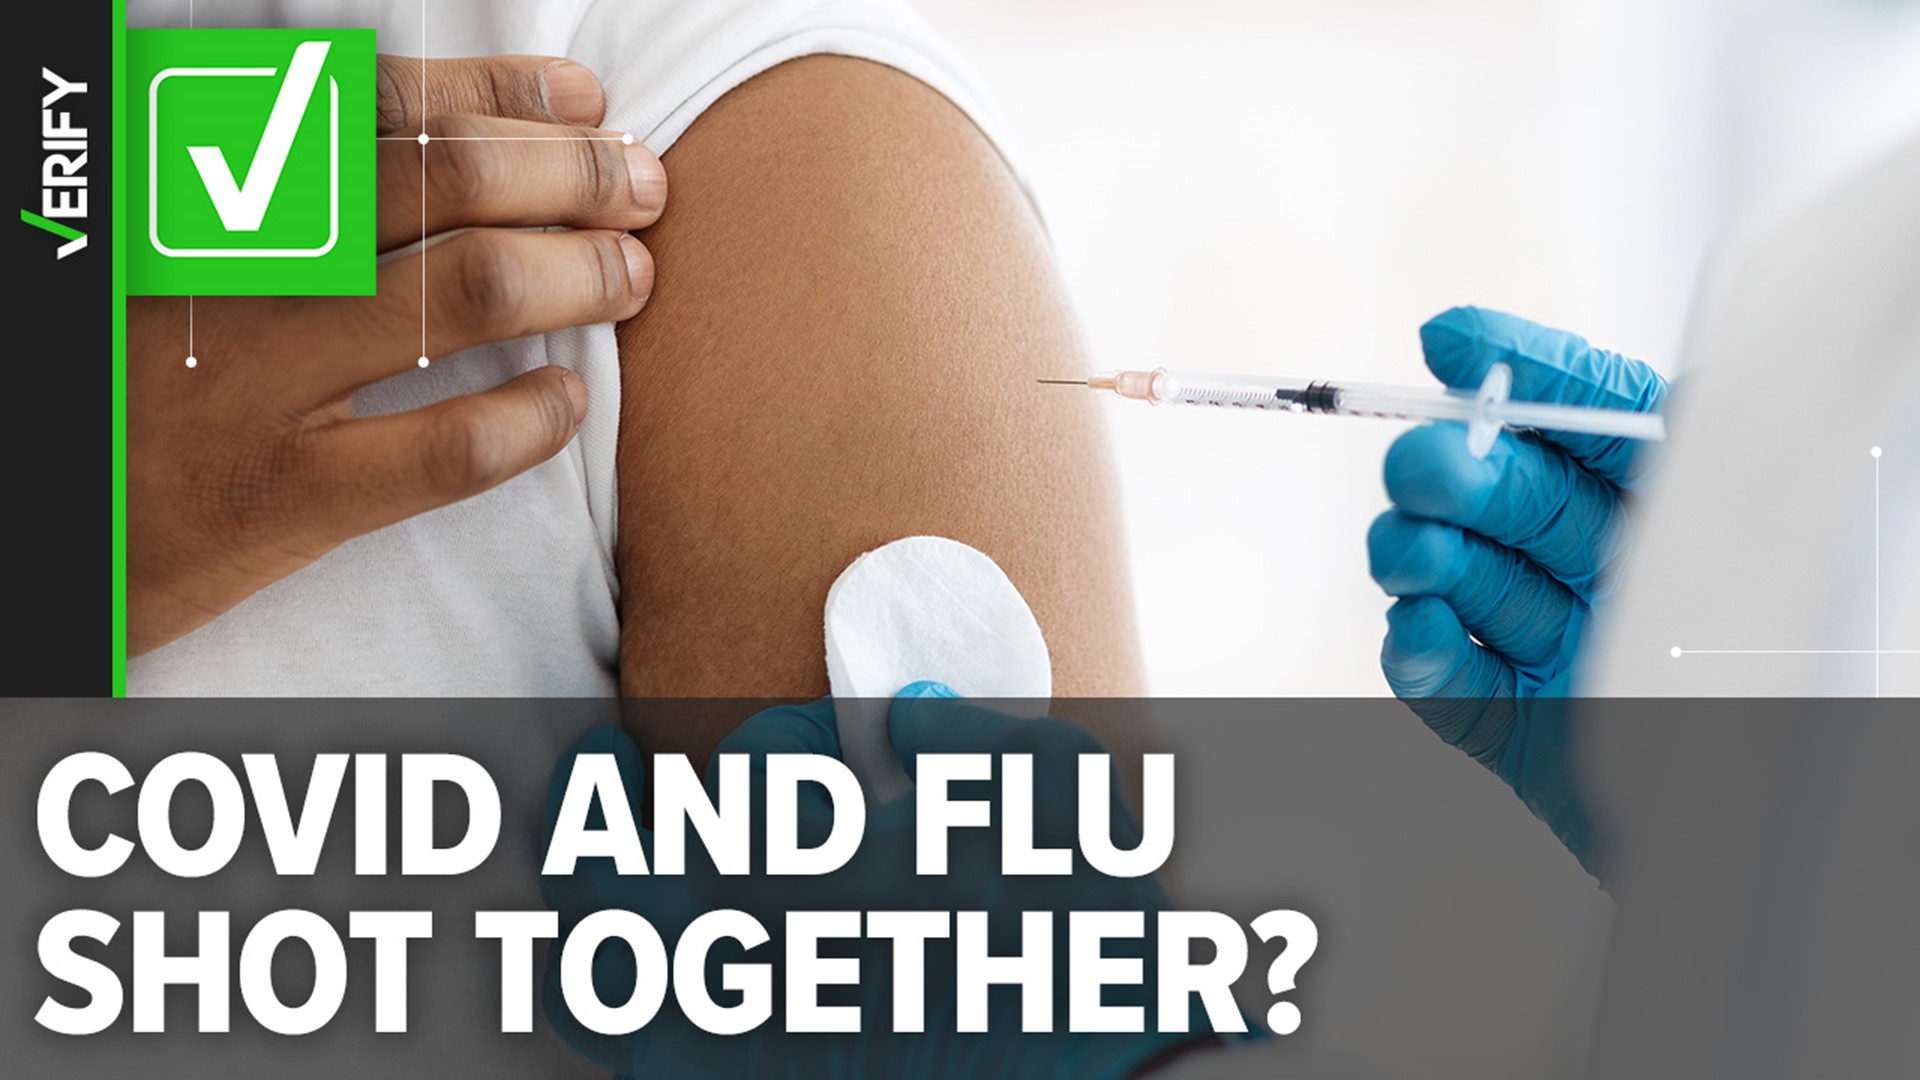 October is the ‘sweet spot’ for getting flu shots, and for many people it can be convenient to combine their flu and COVID vaccines into one appointment.